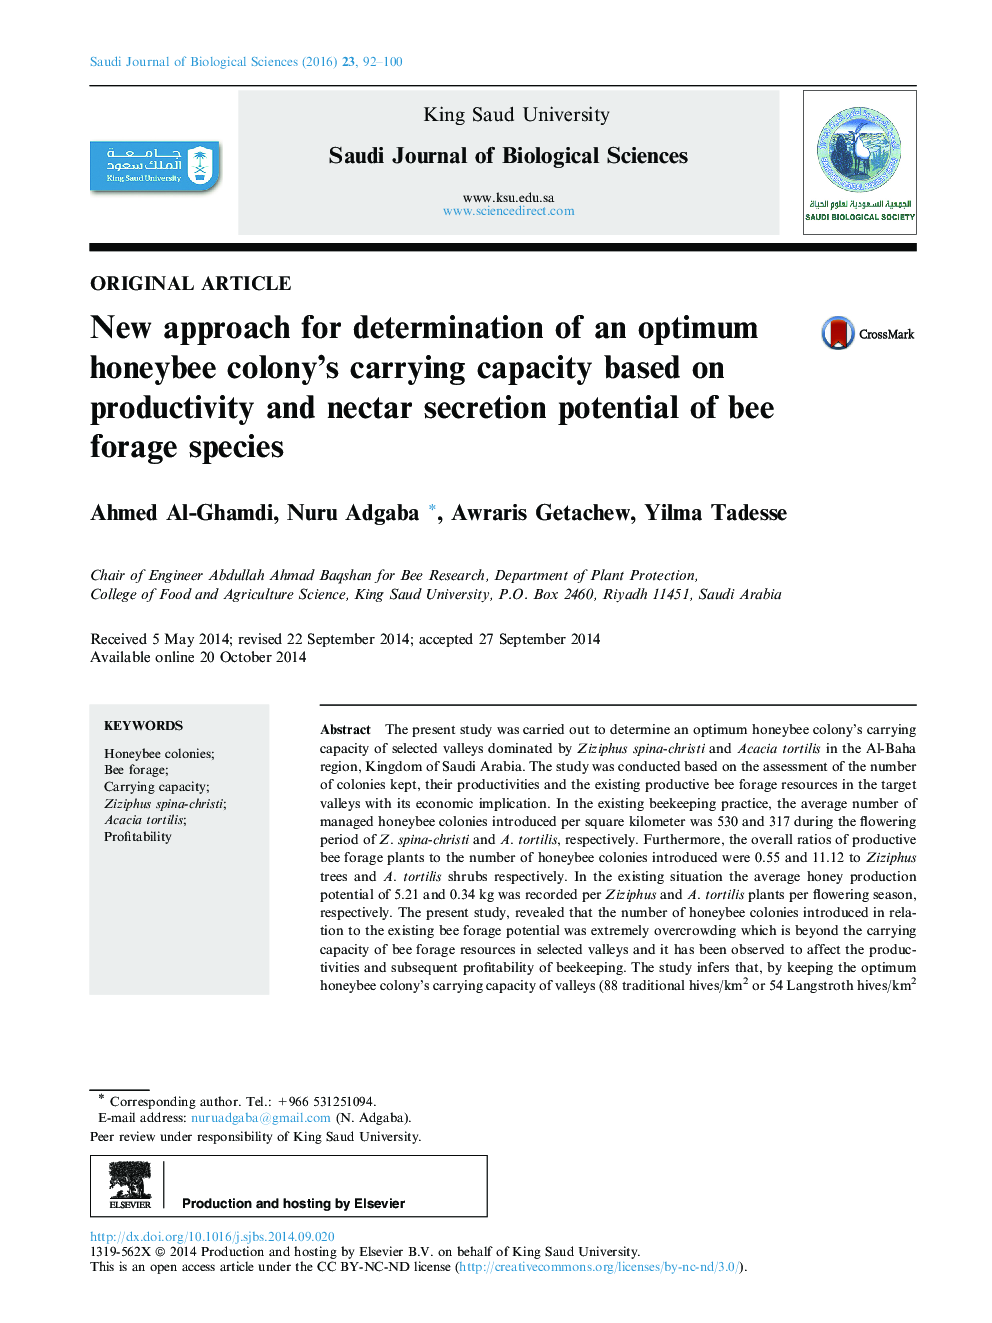 New approach for determination of an optimum honeybee colony’s carrying capacity based on productivity and nectar secretion potential of bee forage species 